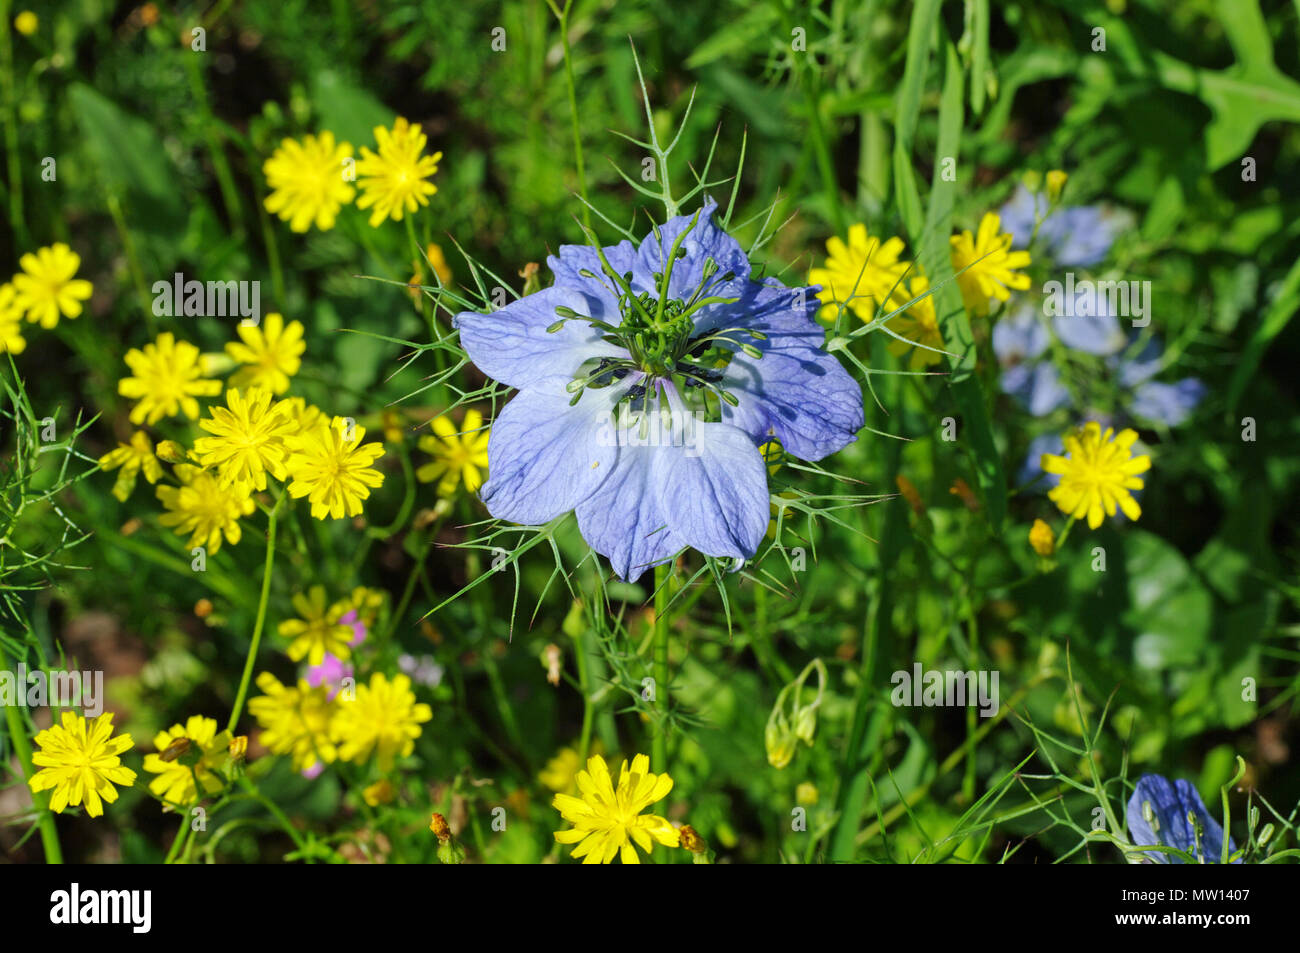 Nigella damascena, the Love-in-a-mist (family Ranunculaceae), in a meadow Stock Photo